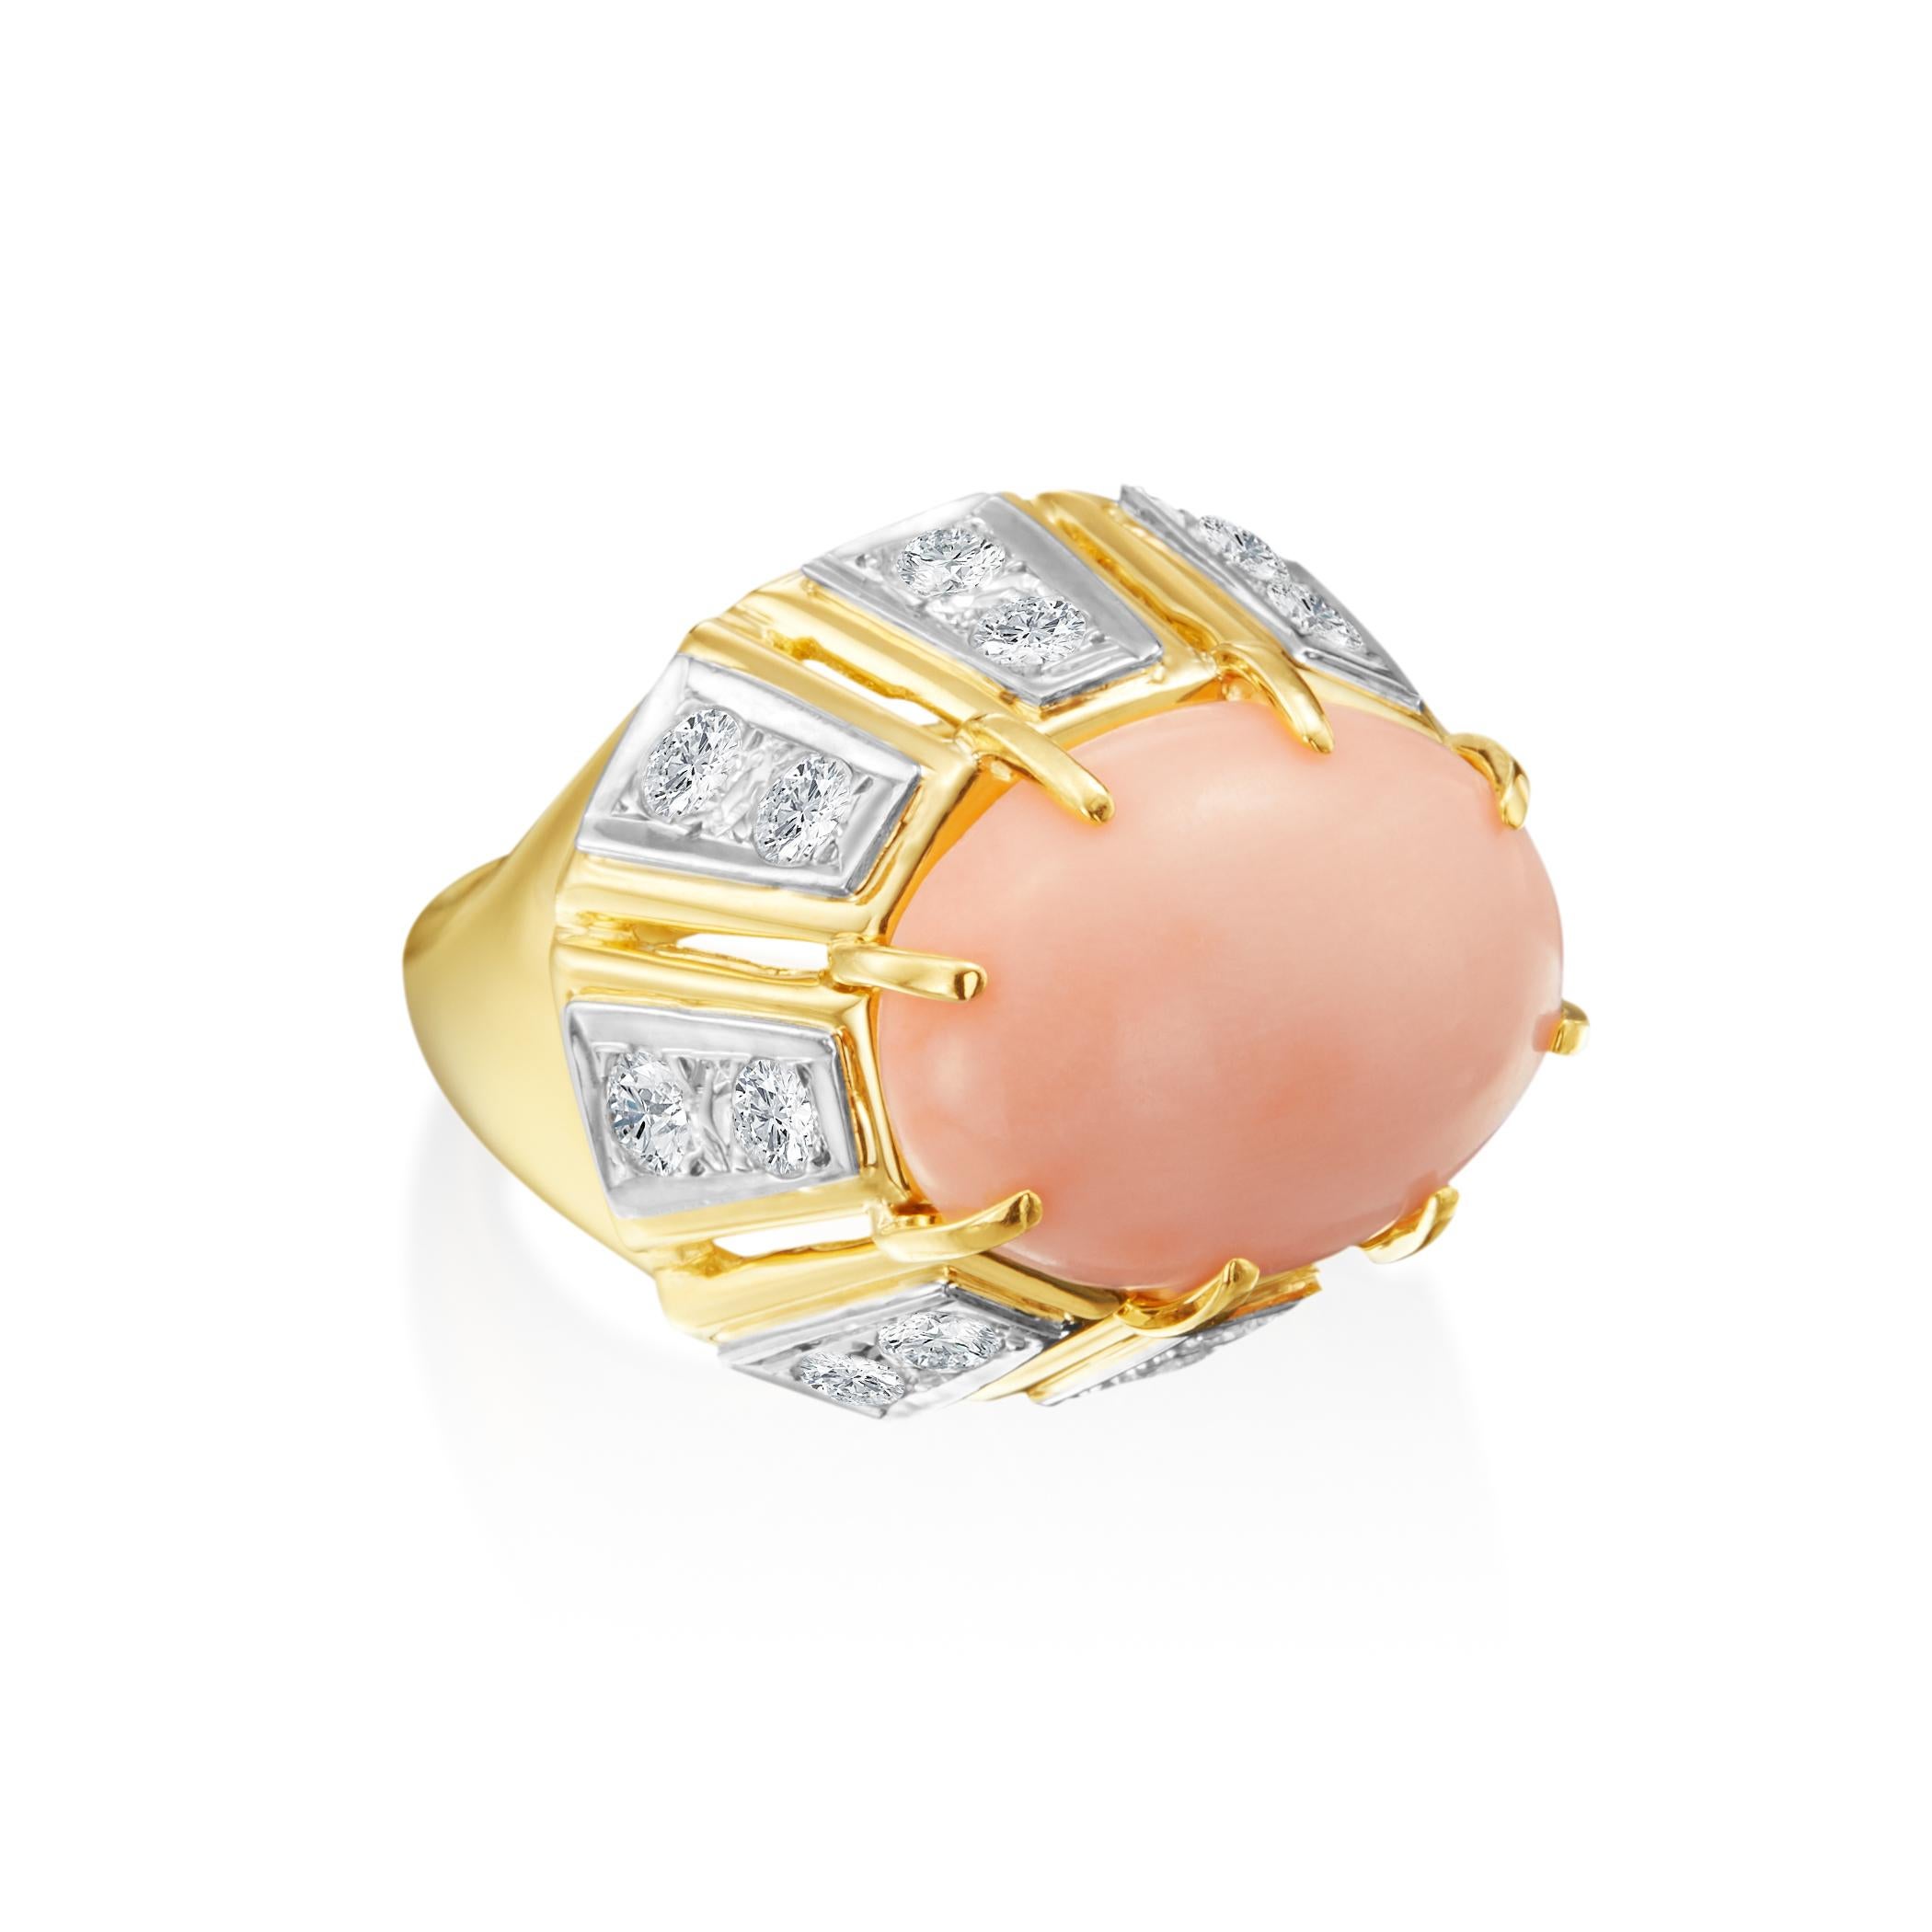 A unique 14.57ctw oval angel skin Coral is prong set as the centerpiece of this incredible 18K yellow gold ring. With 16 round brilliant cut diamonds (G-H color; VS internal clarity)that are vertically set around the Coral Dome gemstone. This